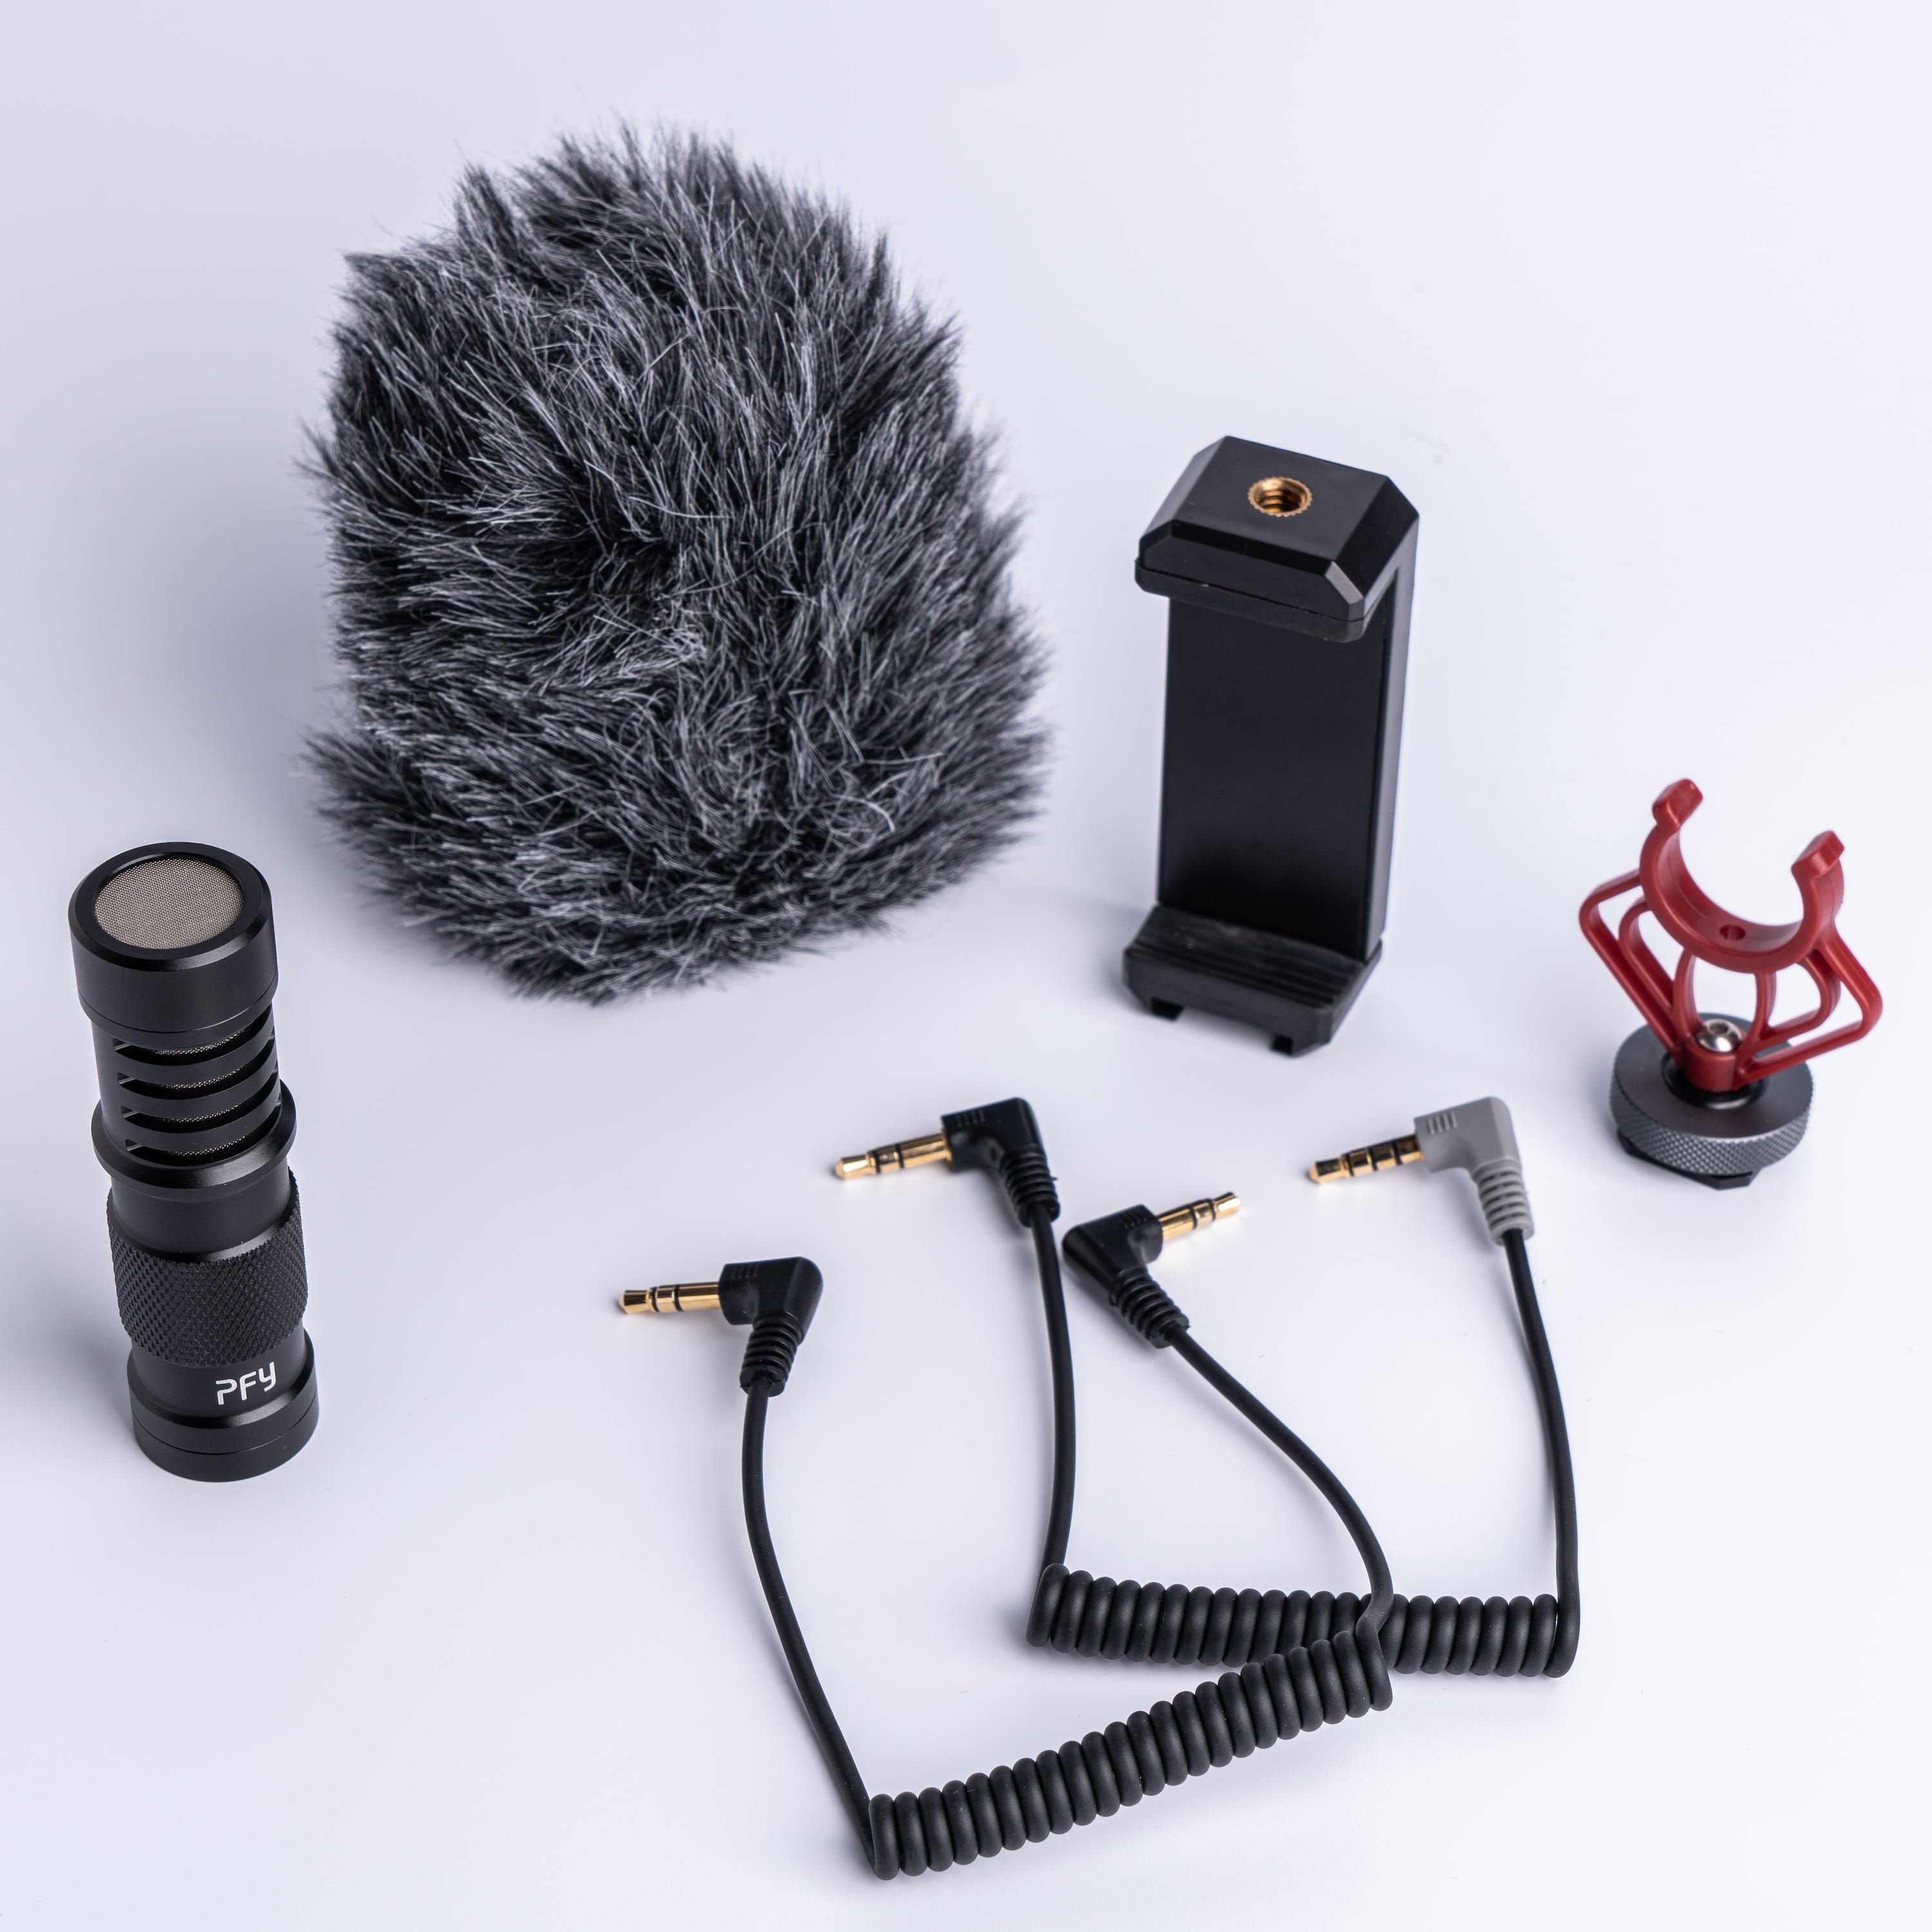 Compact On-Camera Microphone